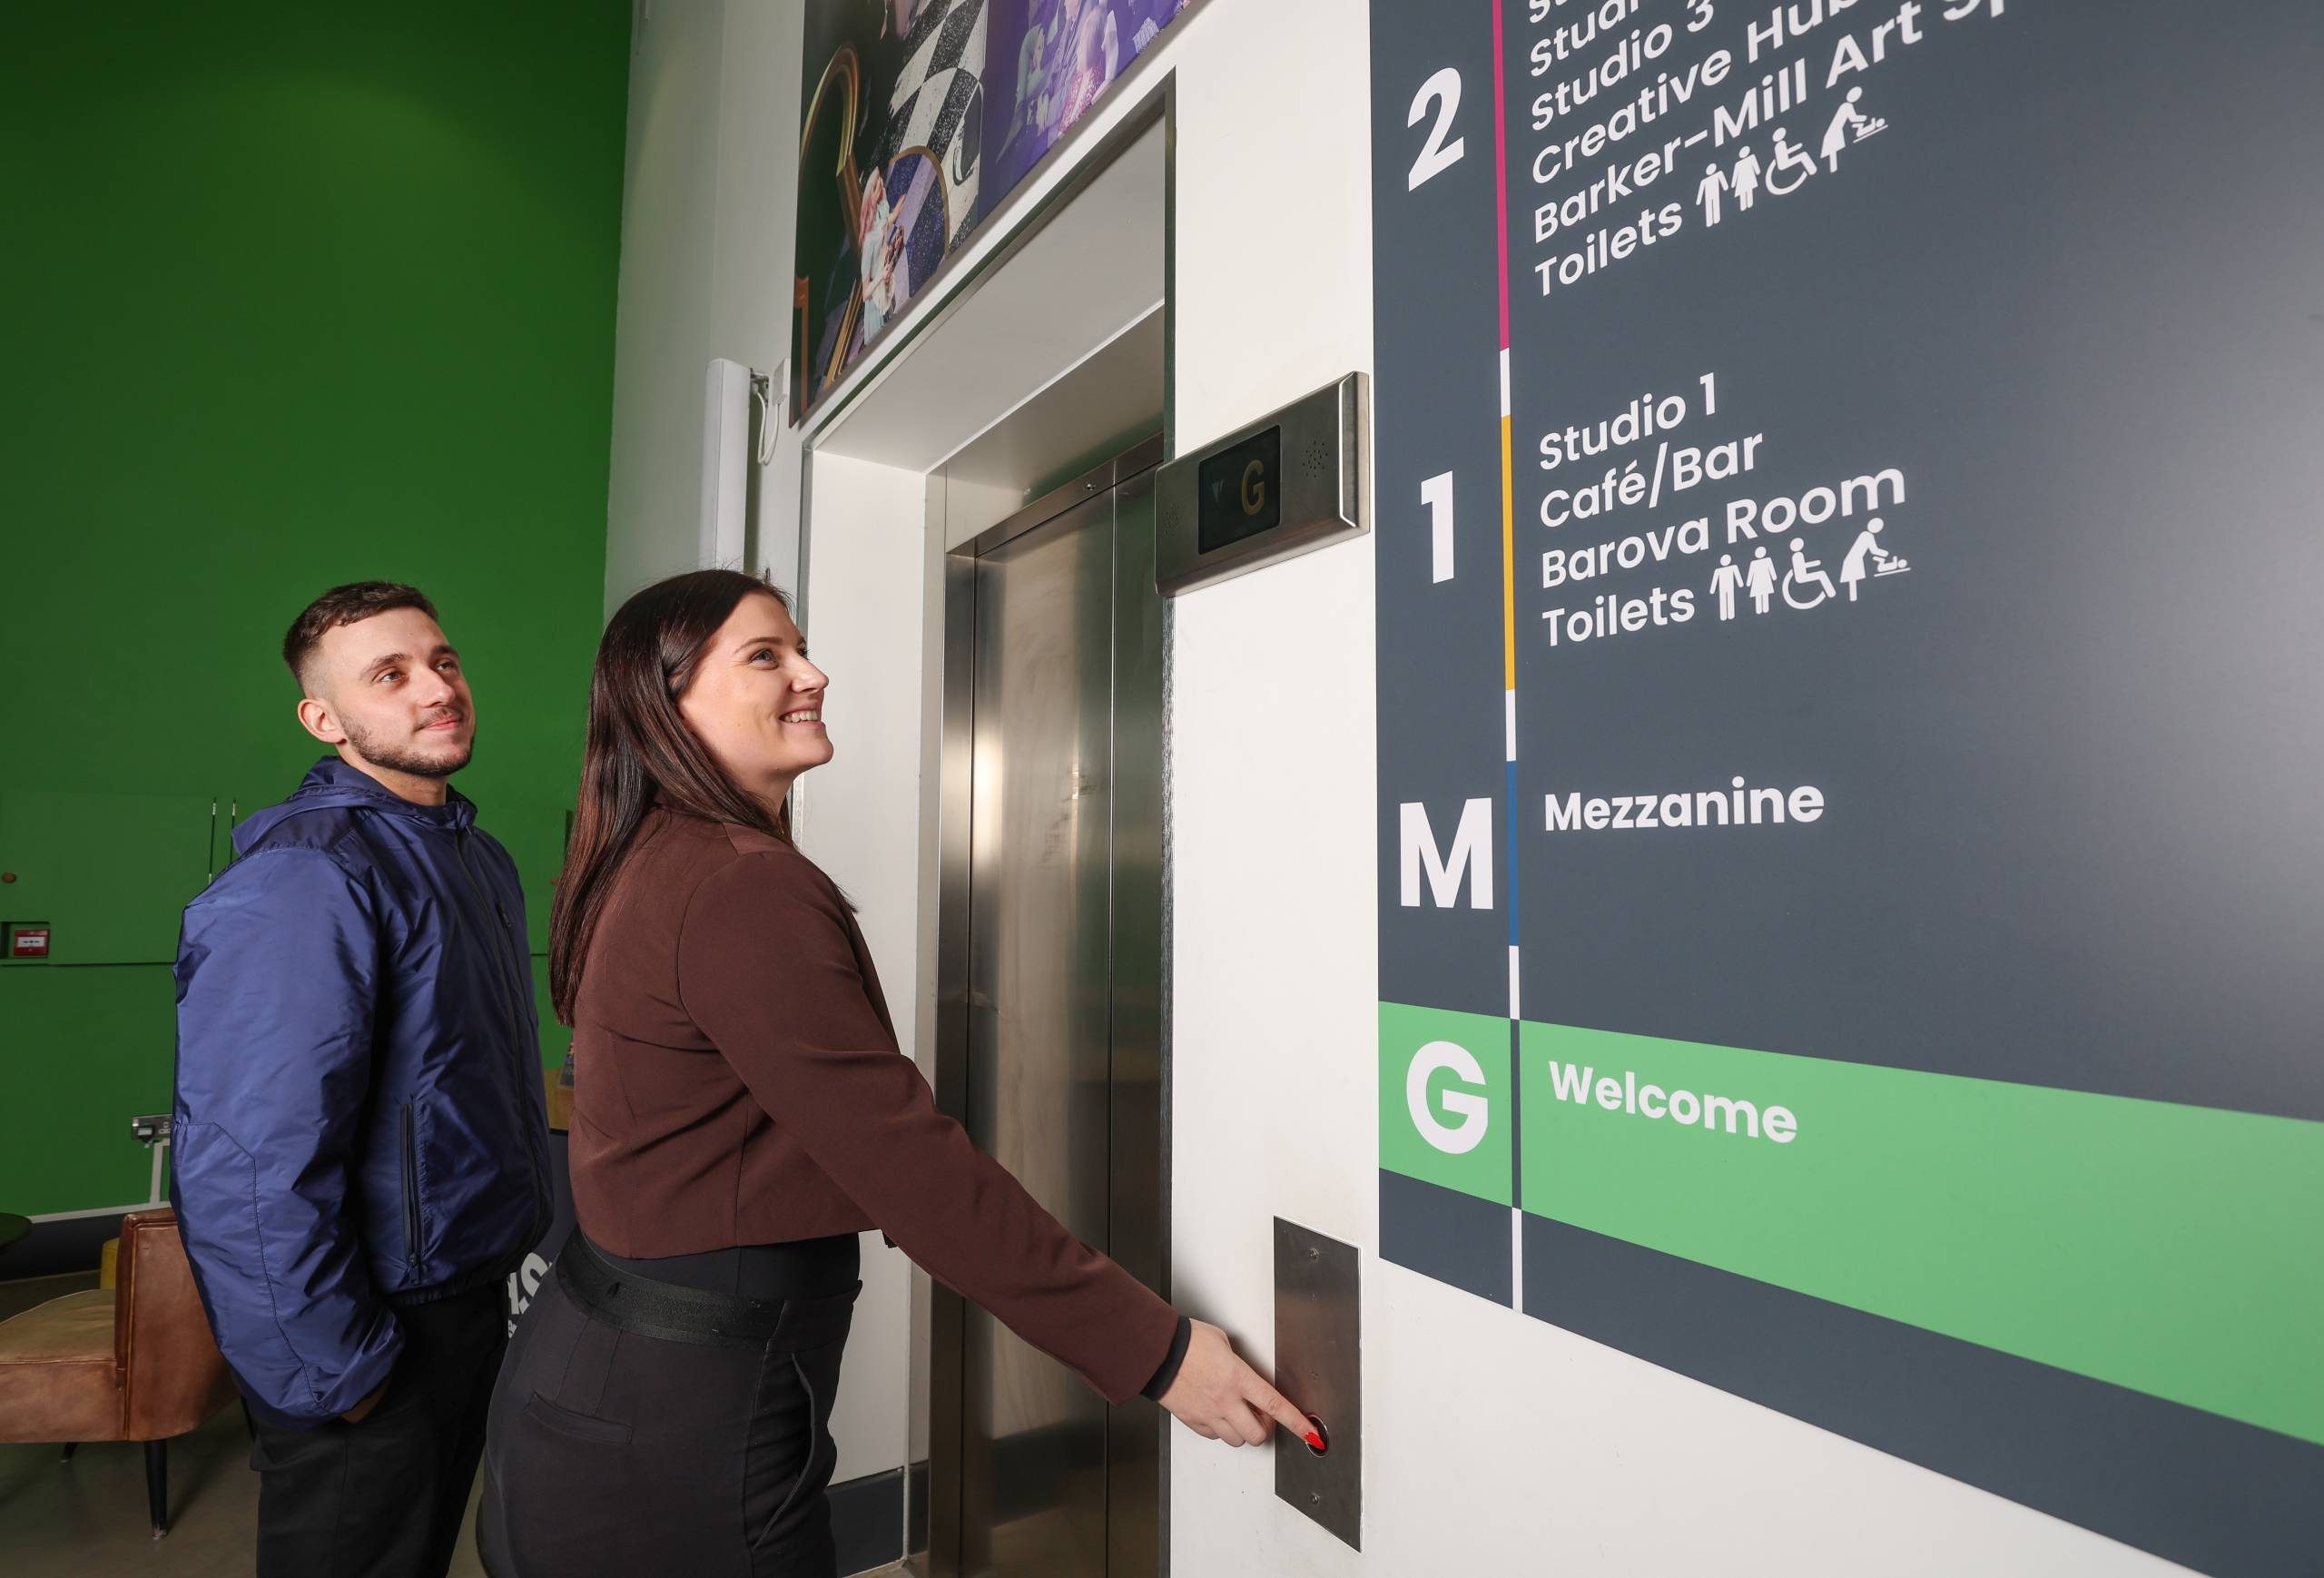 A woman stands in front of a lift pressing the button to call the lift. To her right is a sign showing all the areas in the venue. To her left is a man looking up at the sign.